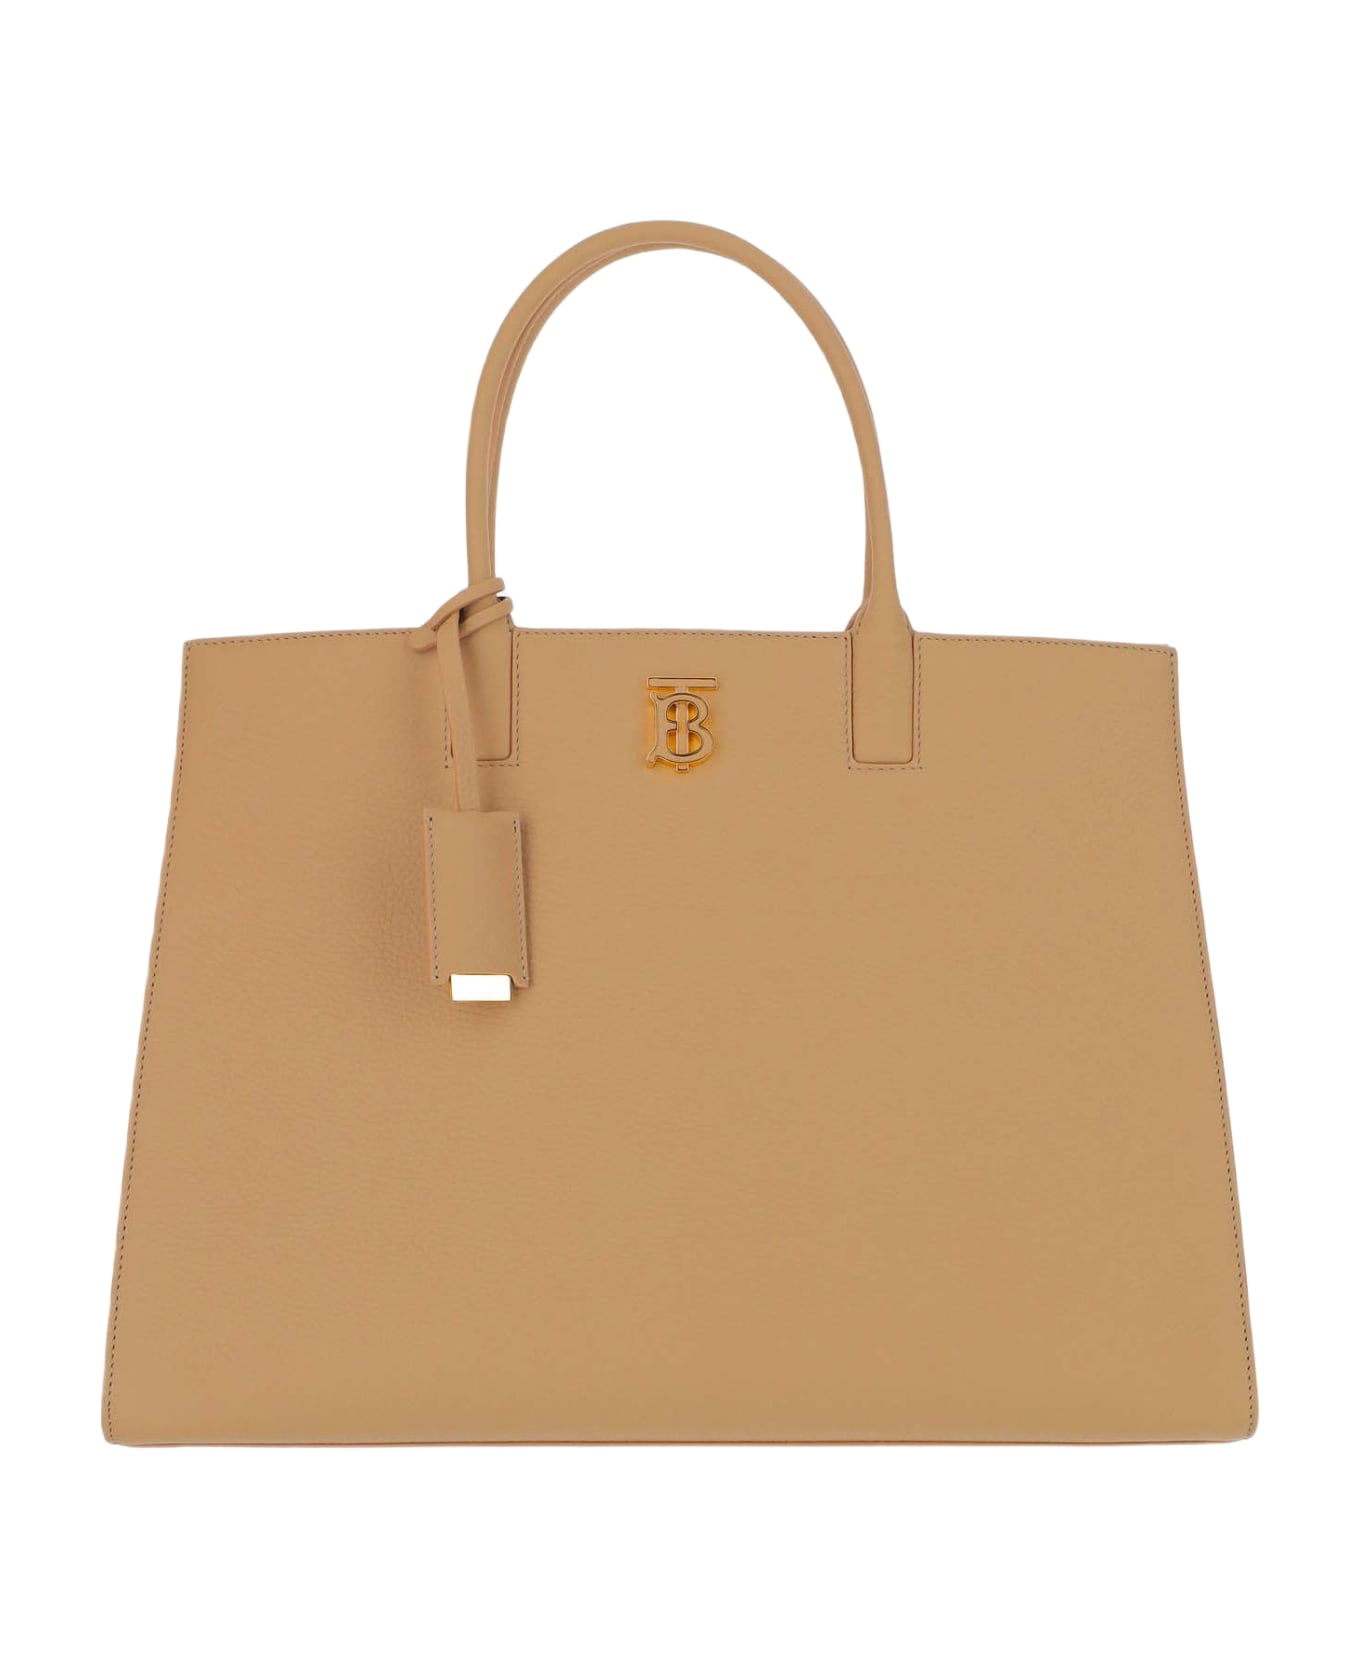 Burberry Frances Small Tote Bag - Beige